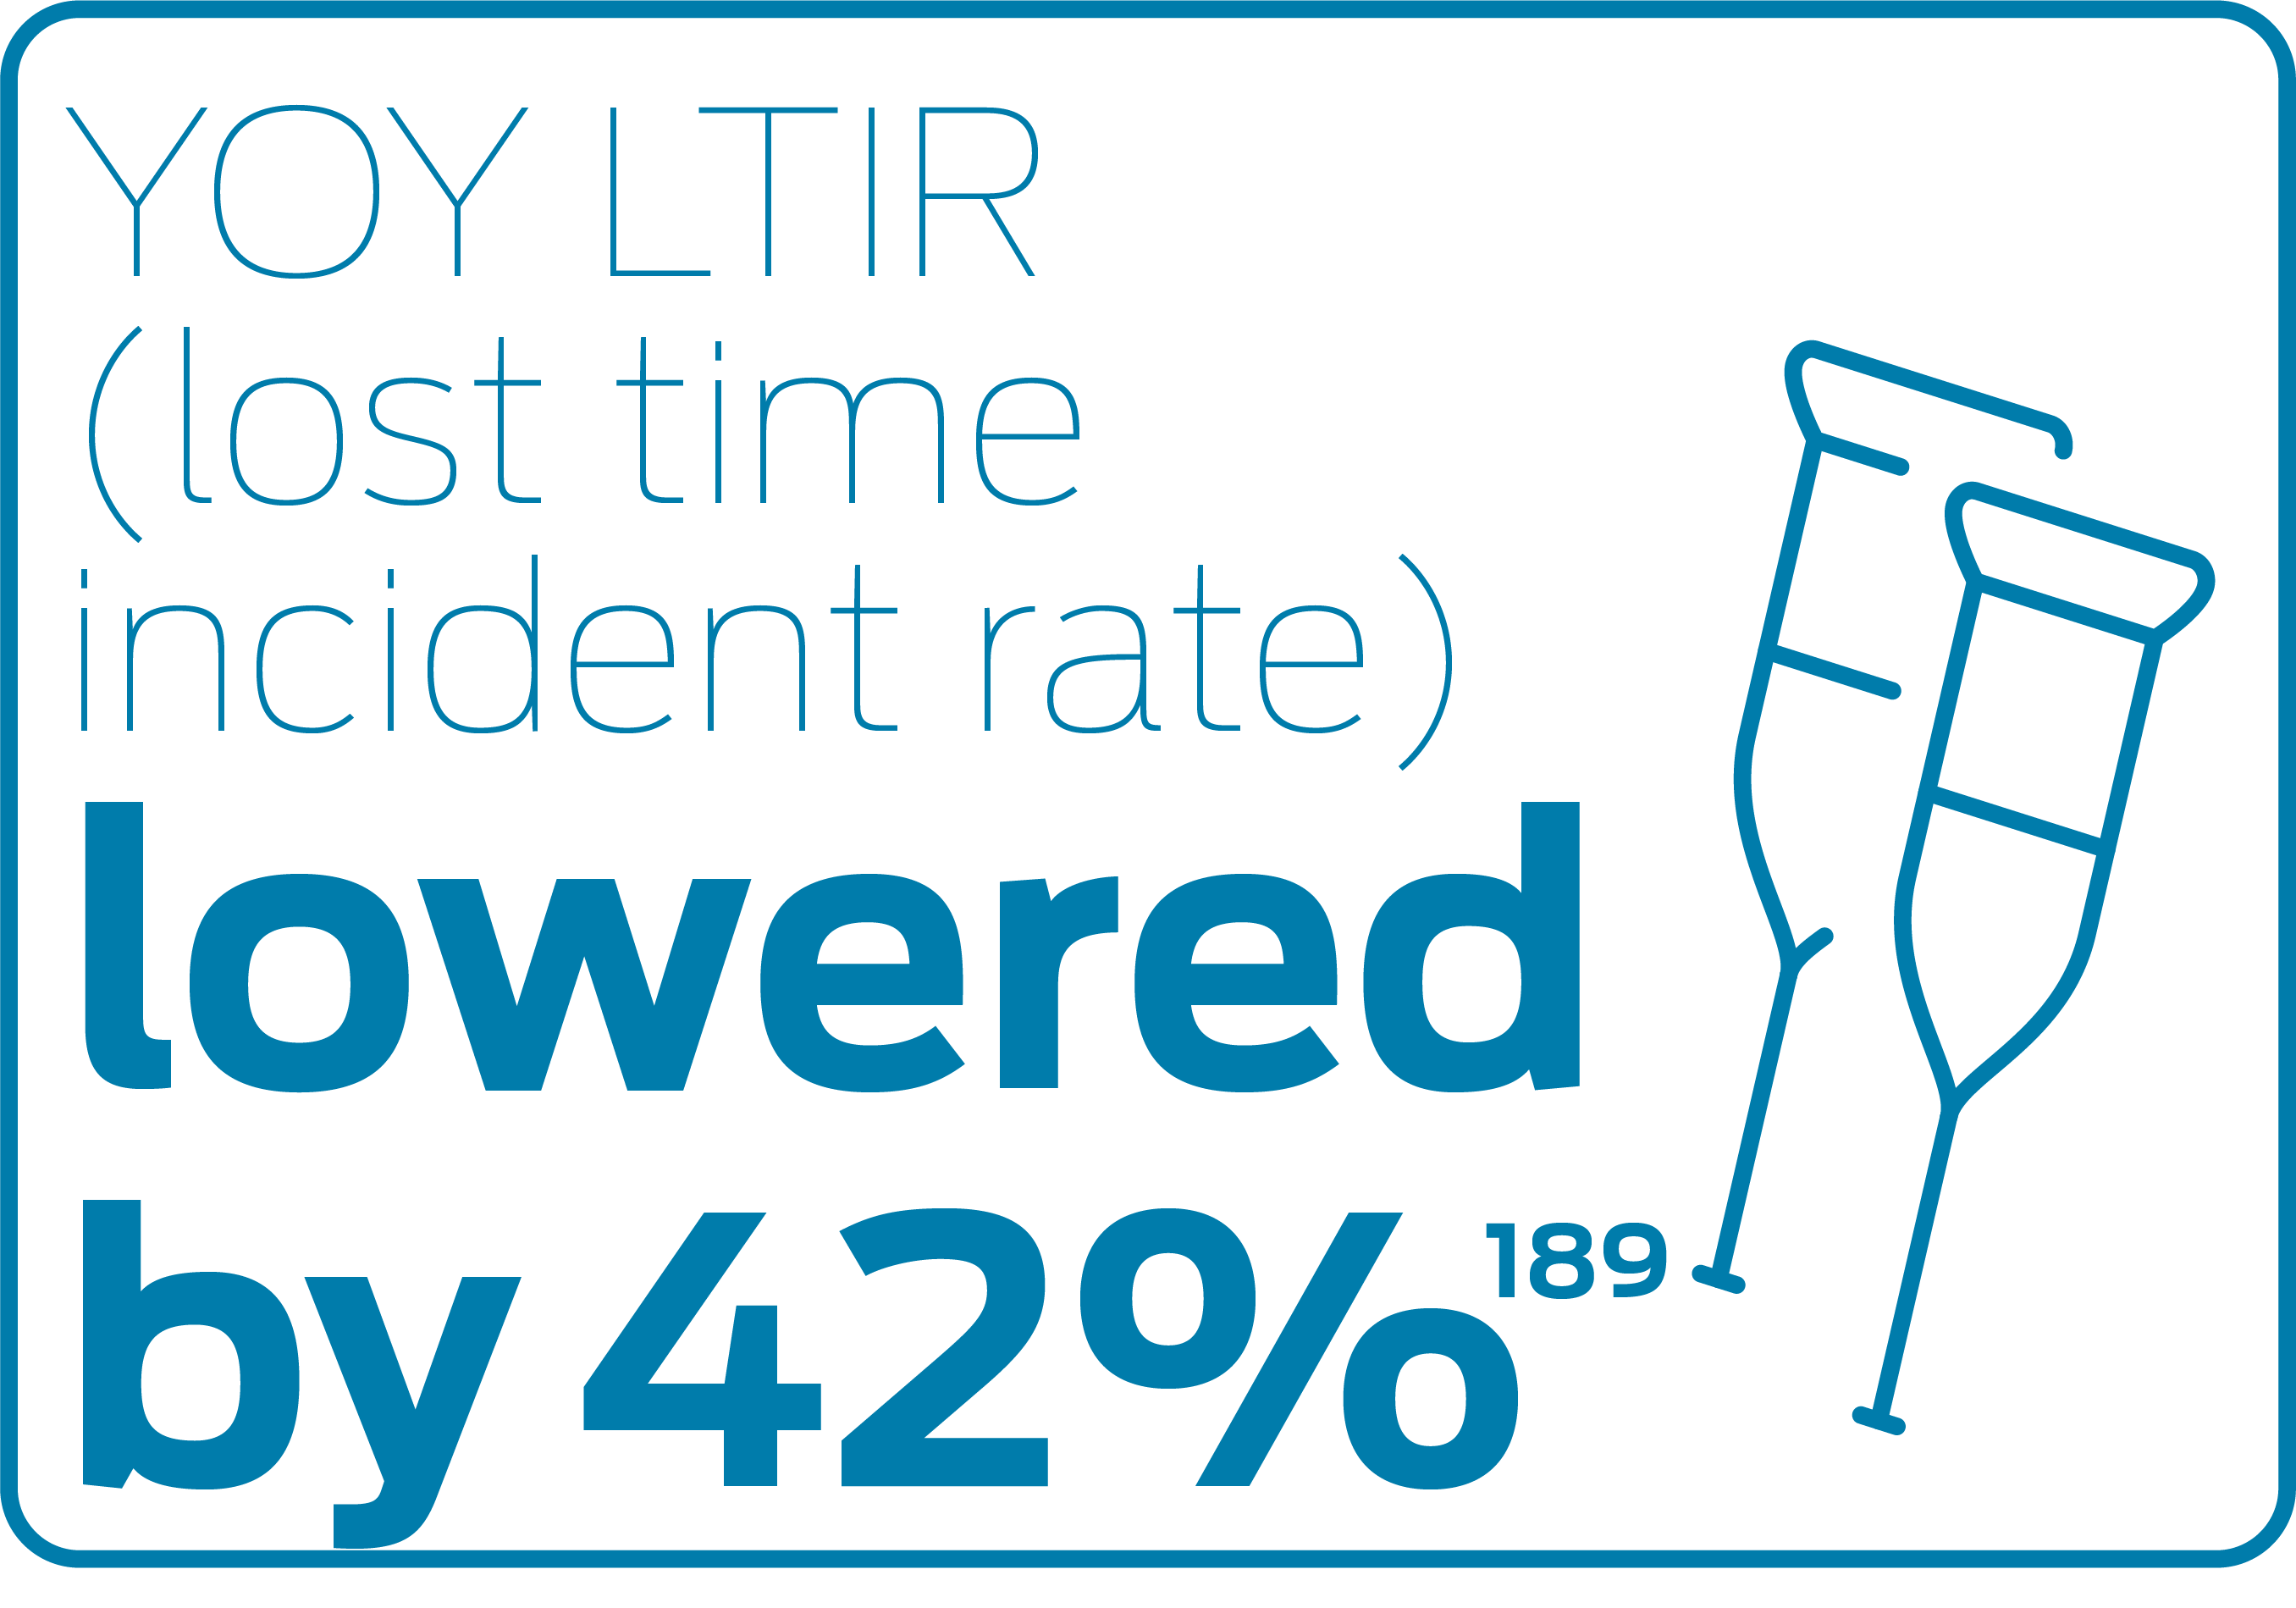 YOY LTIR (lost time incident rate) lowered by 42%